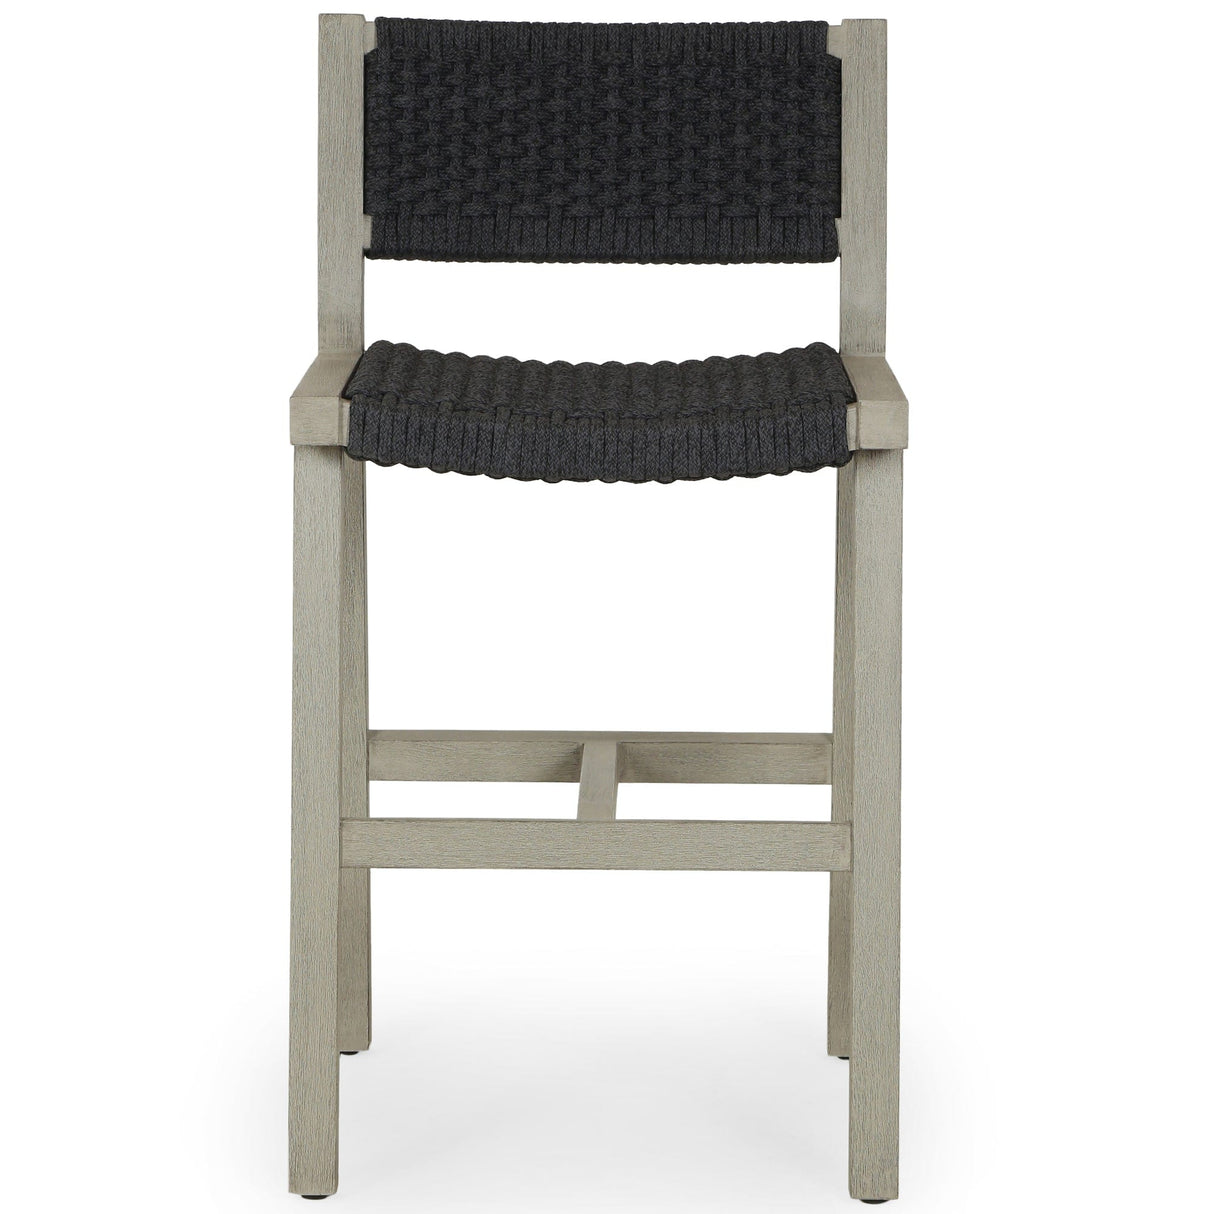 Four Hands Delano Outdoor Bar & Counter Stool Furniture four-hands-JSOL-155 801542516376